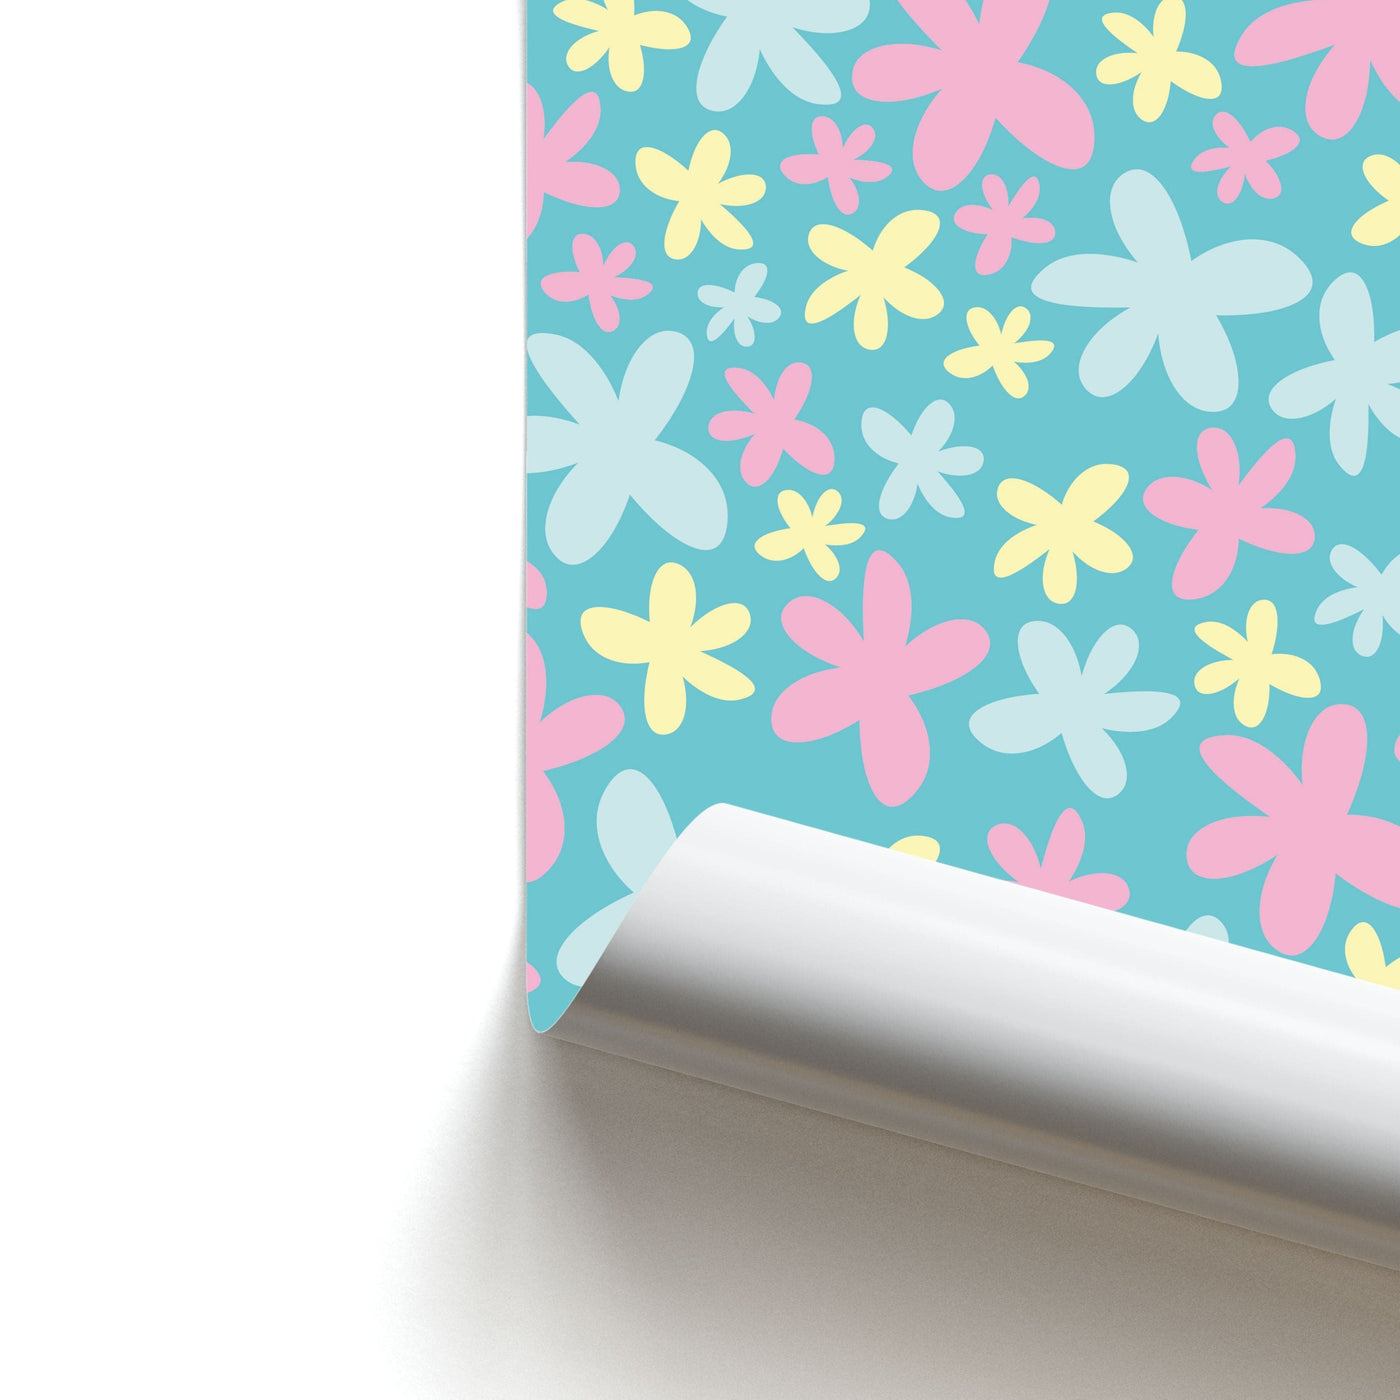 Blue, Pink And Yellow Flowers - Spring Patterns Poster